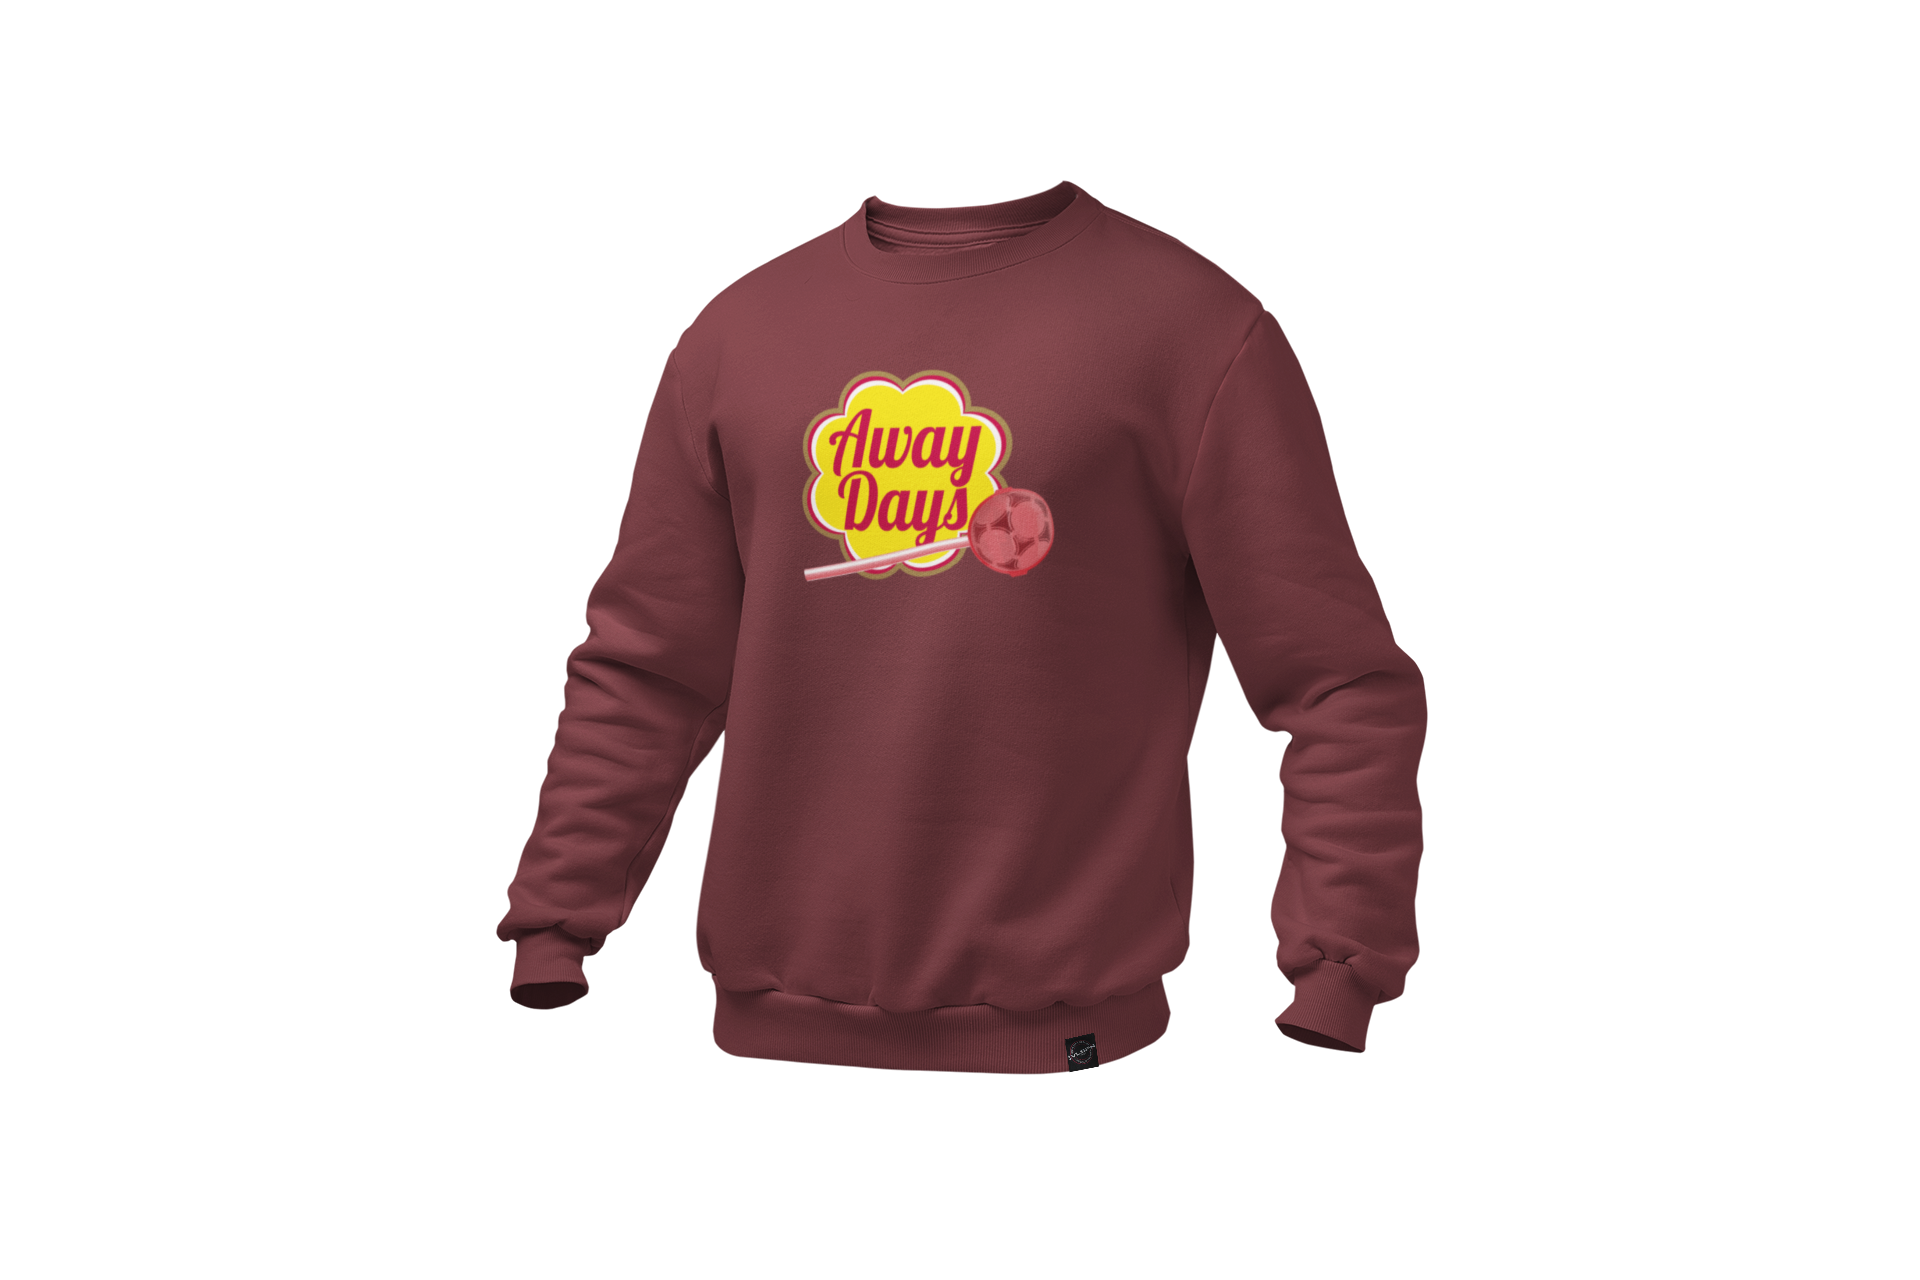 mockup-of-a-ghosted-crewneck-sweatshirt-over-a-solid-background-26960 - 2020-11-06T163748.059.png